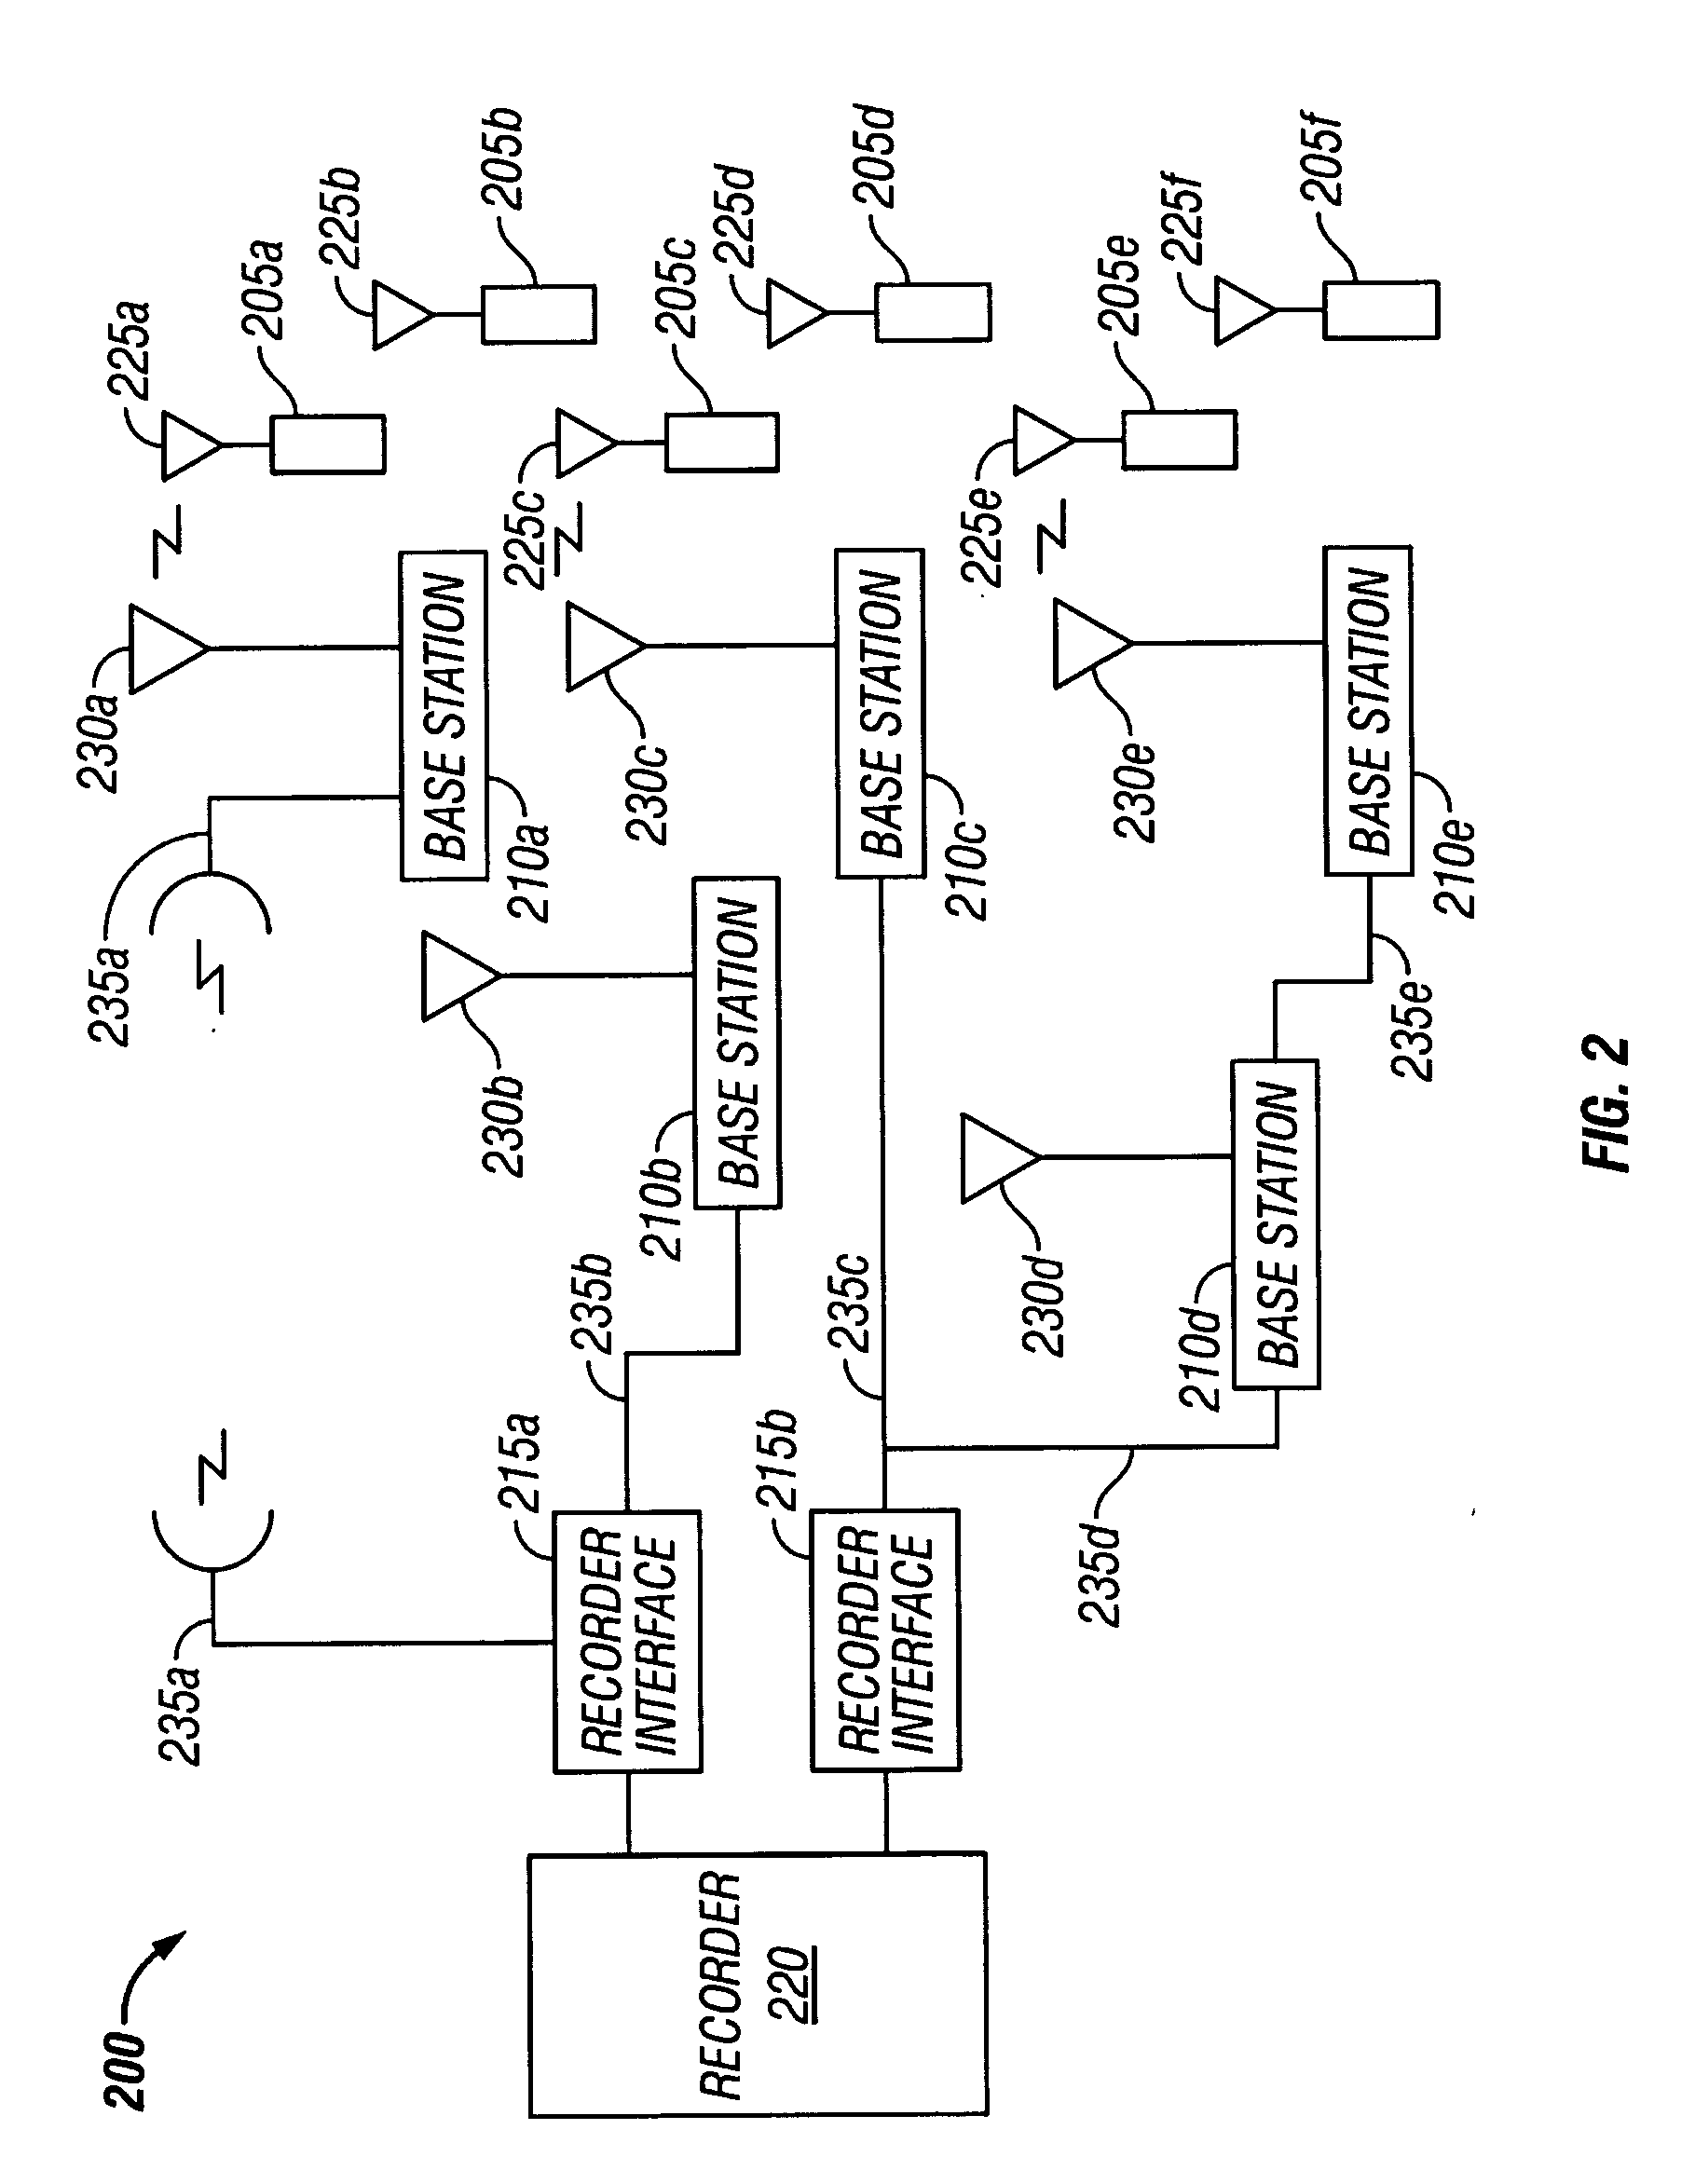 Seismic telemetry system with steerable antennas